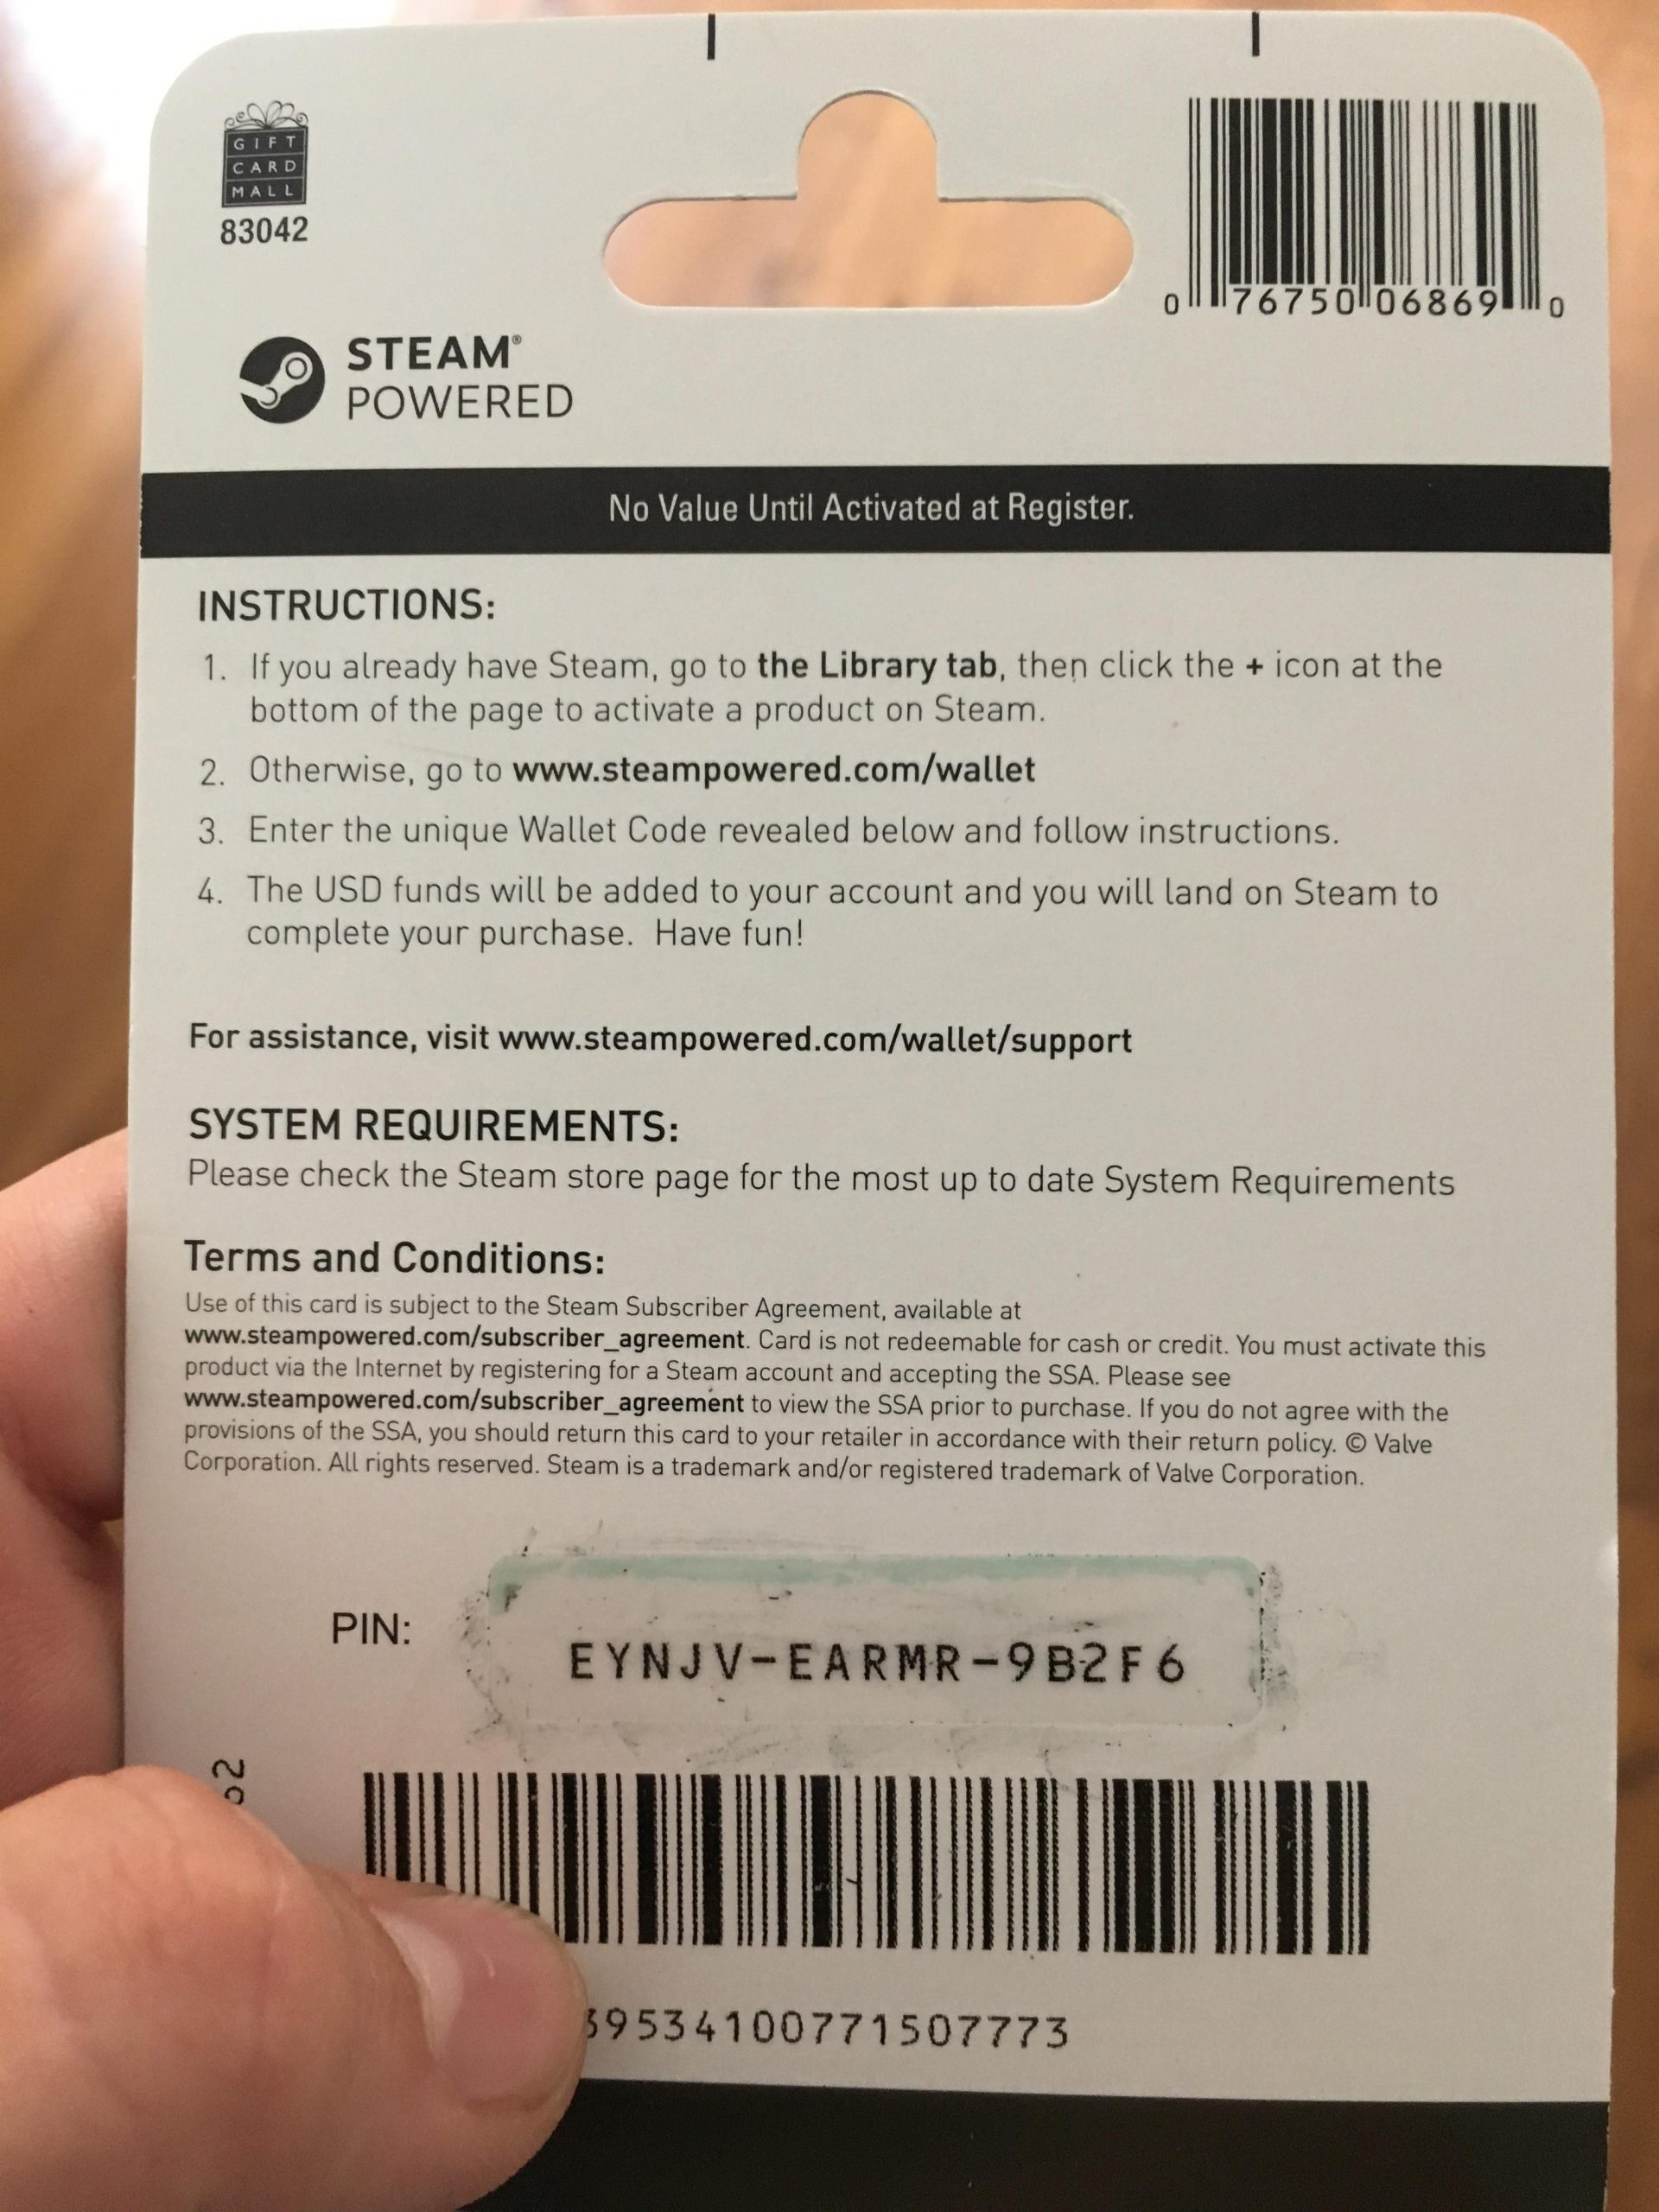 An Image of a Used Steam Gift Card.